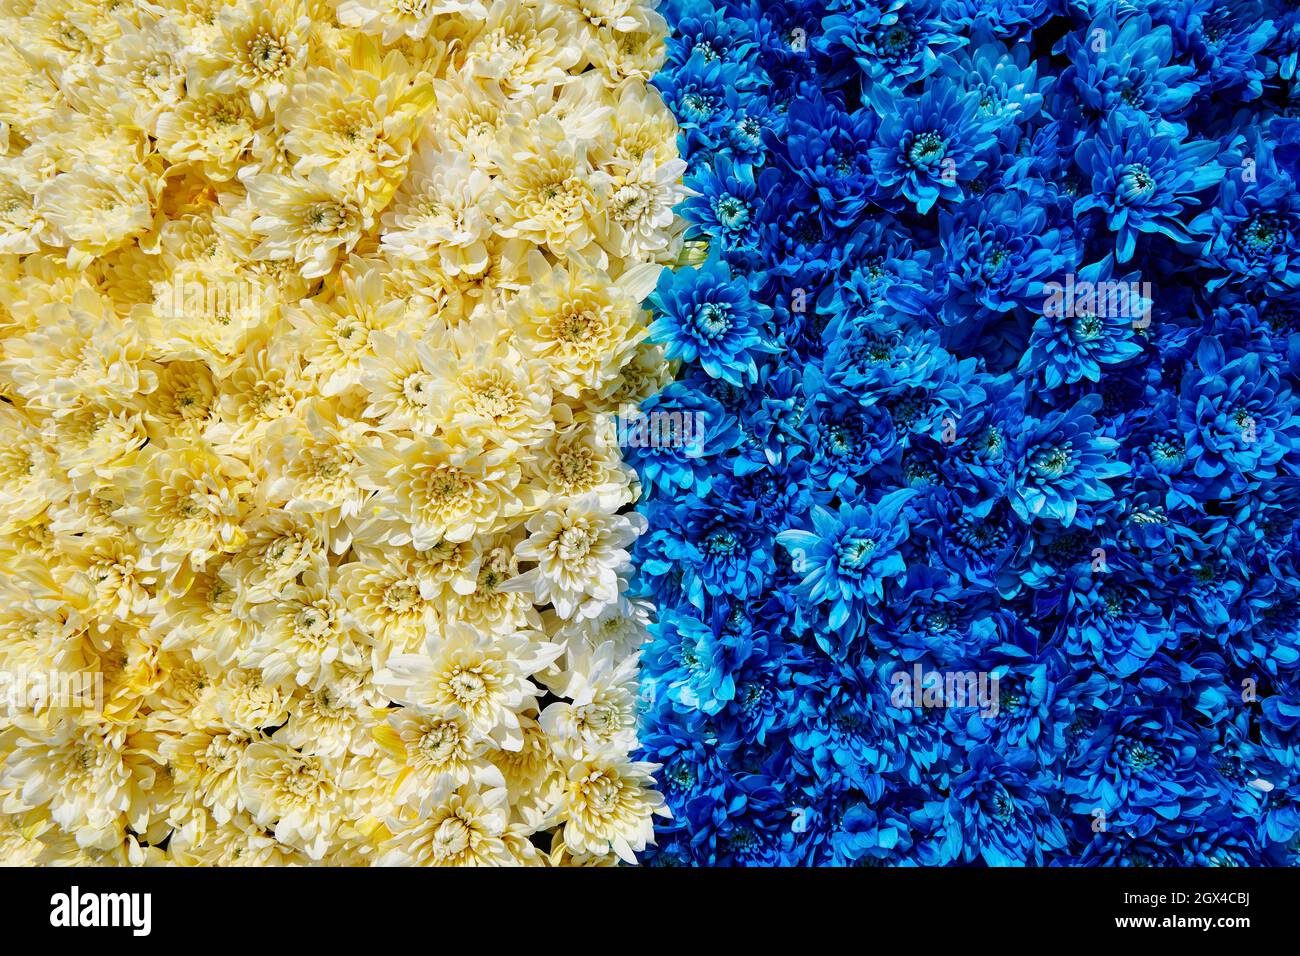 Blue and yellow chrysanthemums  background. Huge flowers bouquet.  View from above. Colour contrast. Horizontal photo. Stock Photo